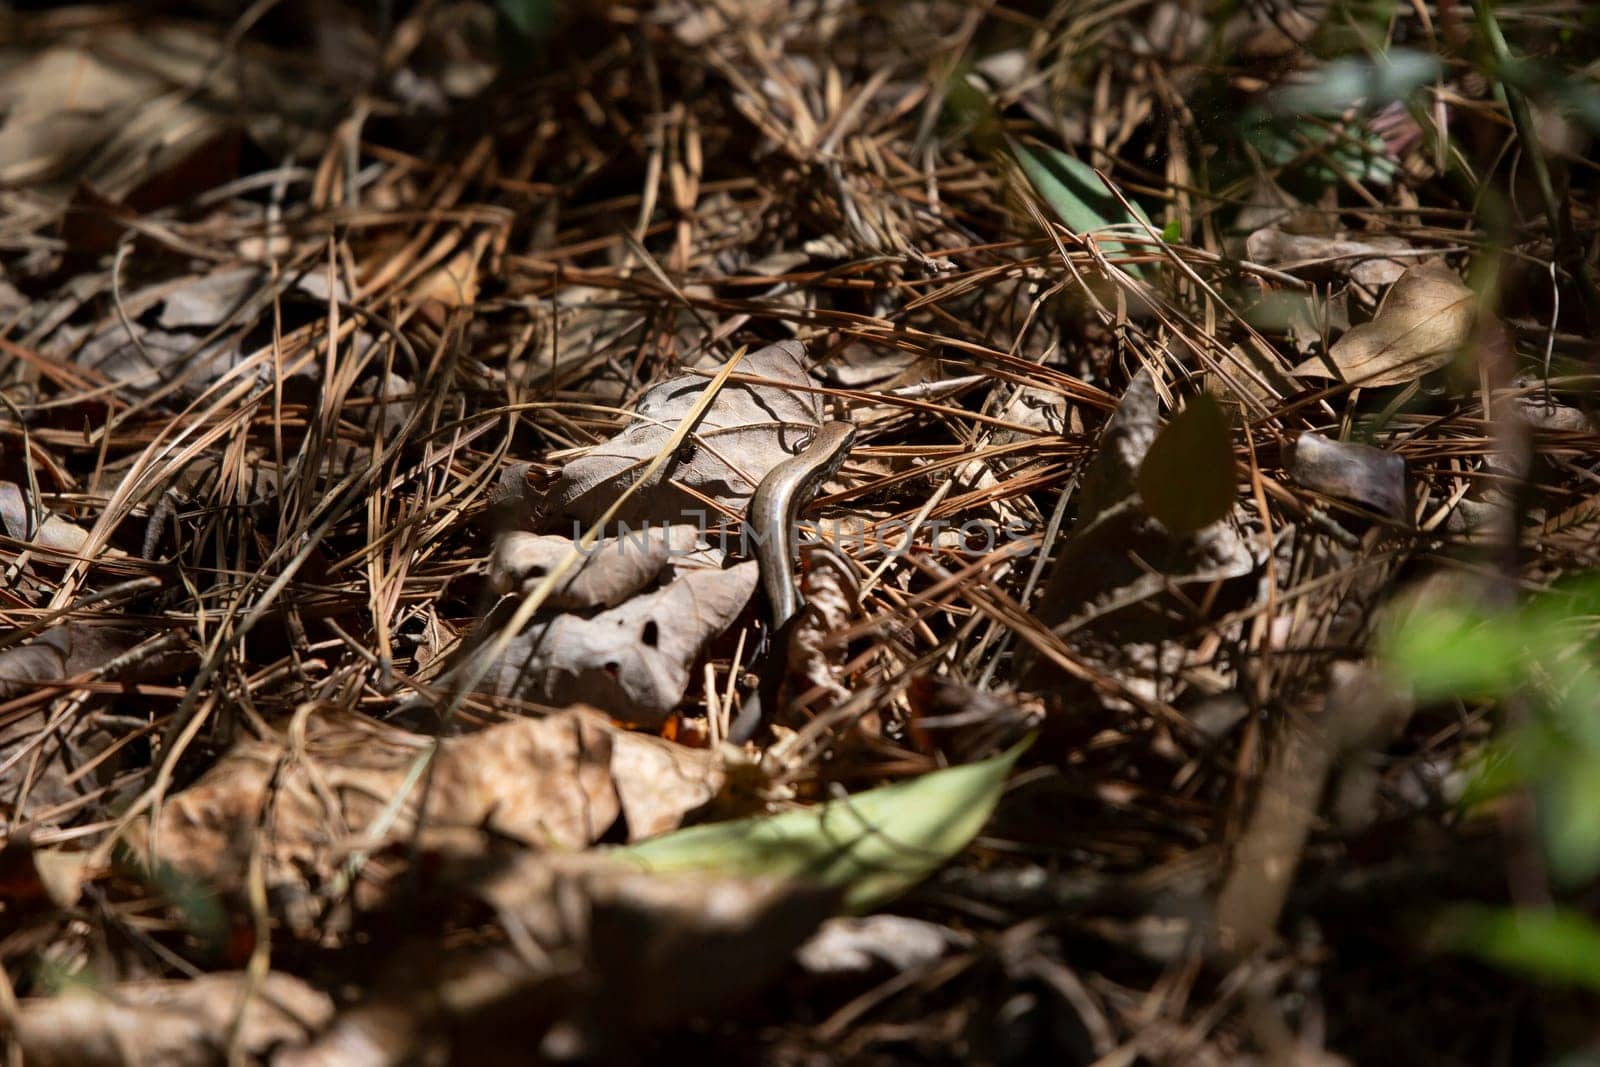 Little brown skink (Scincella lateralis) crawling along dead pine needles